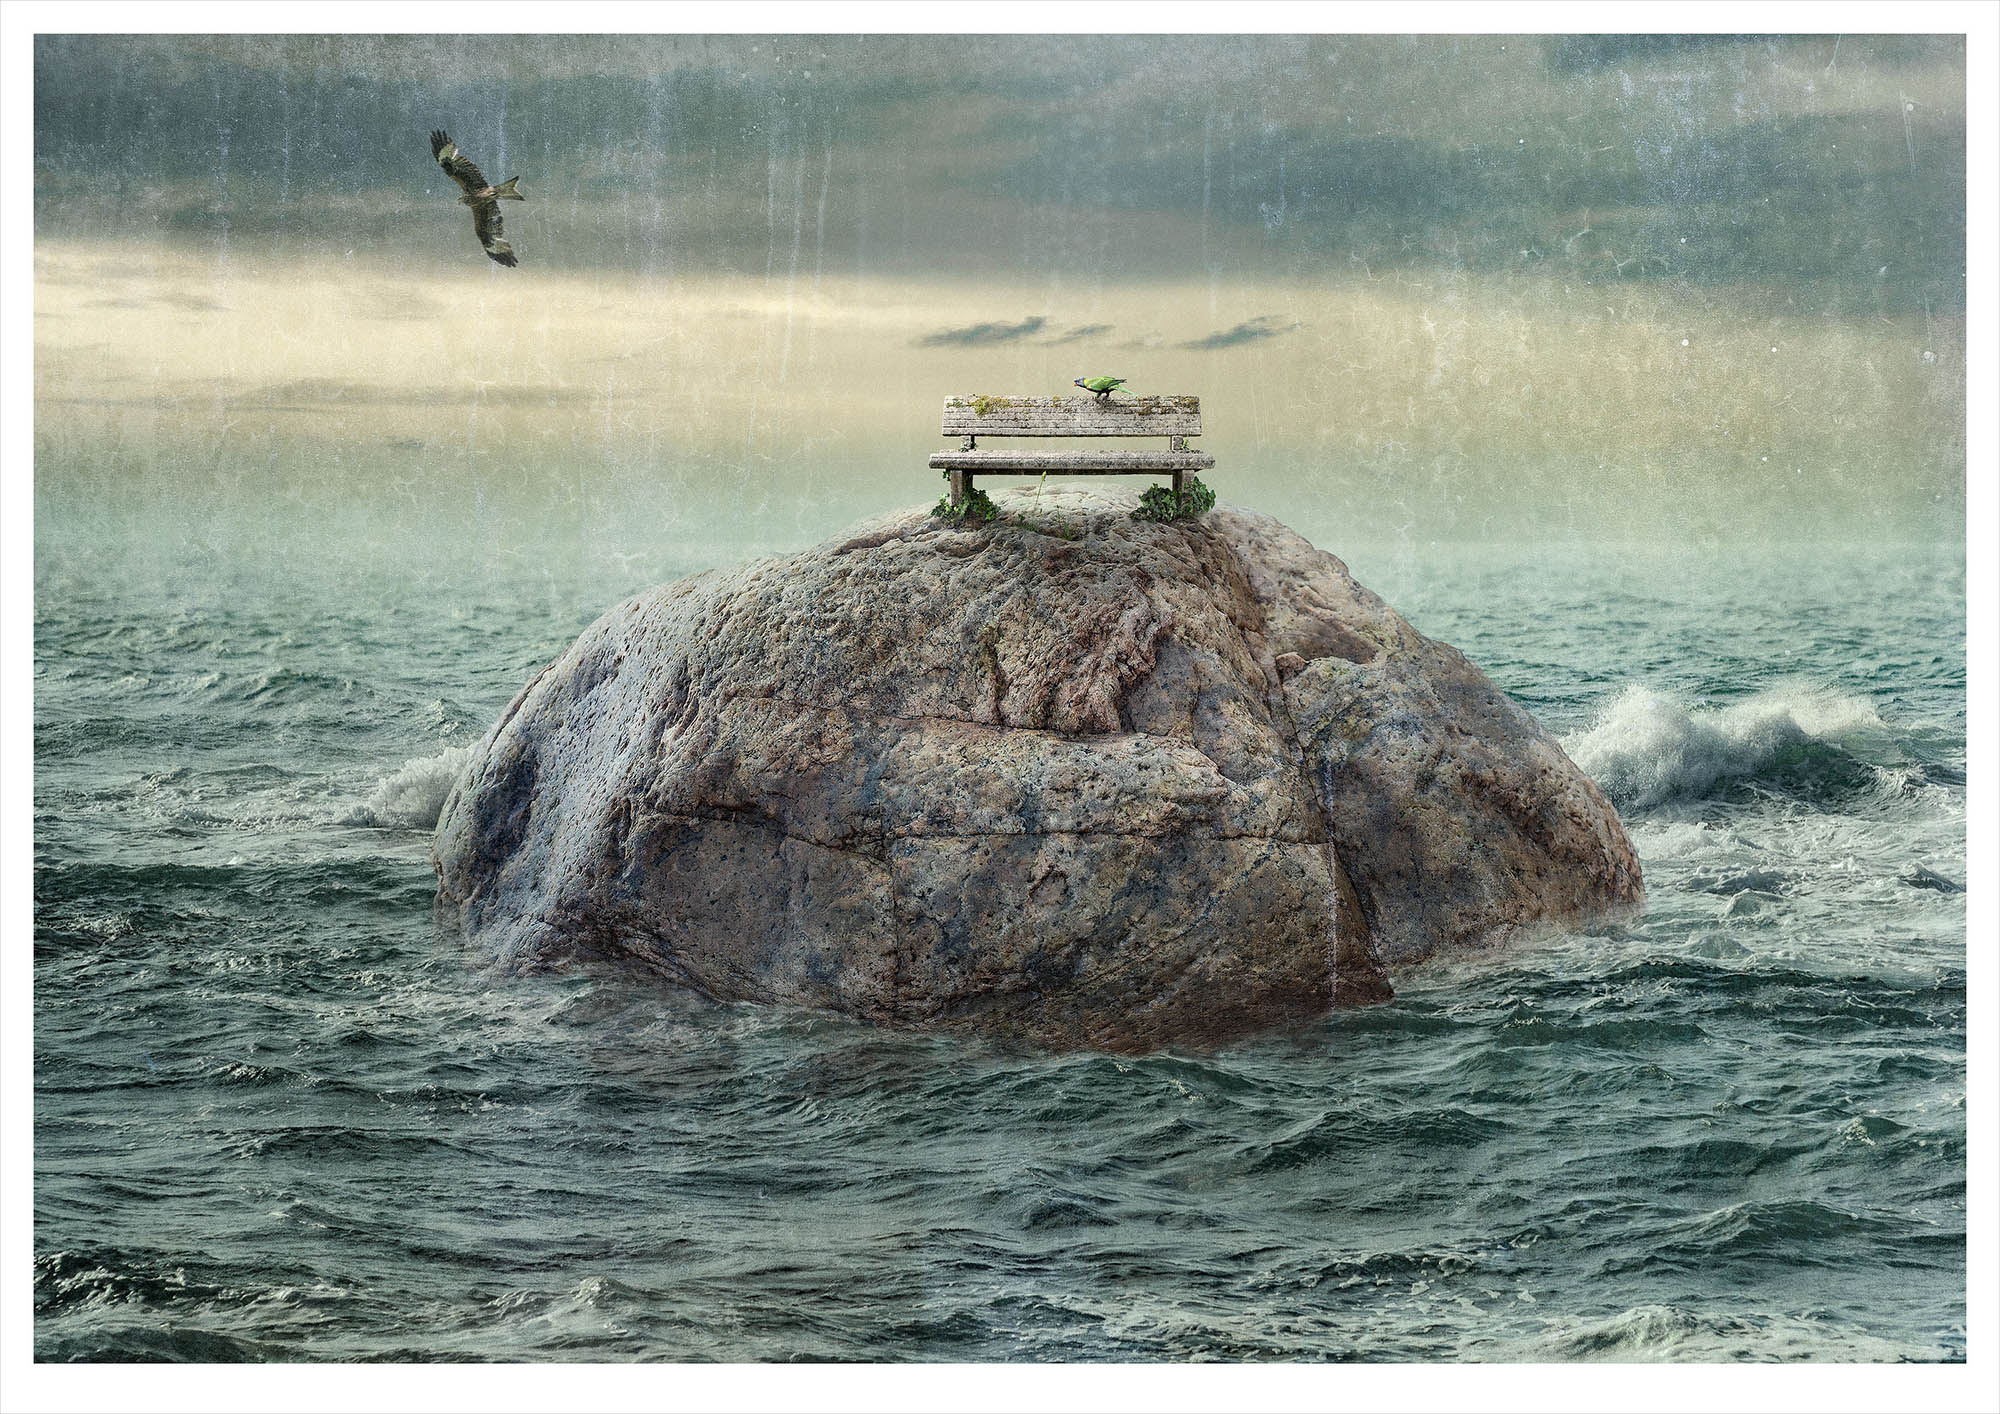 Solitary small fantasy island in ocean with stone bench on which a parrot sits warding off a predatory hawk